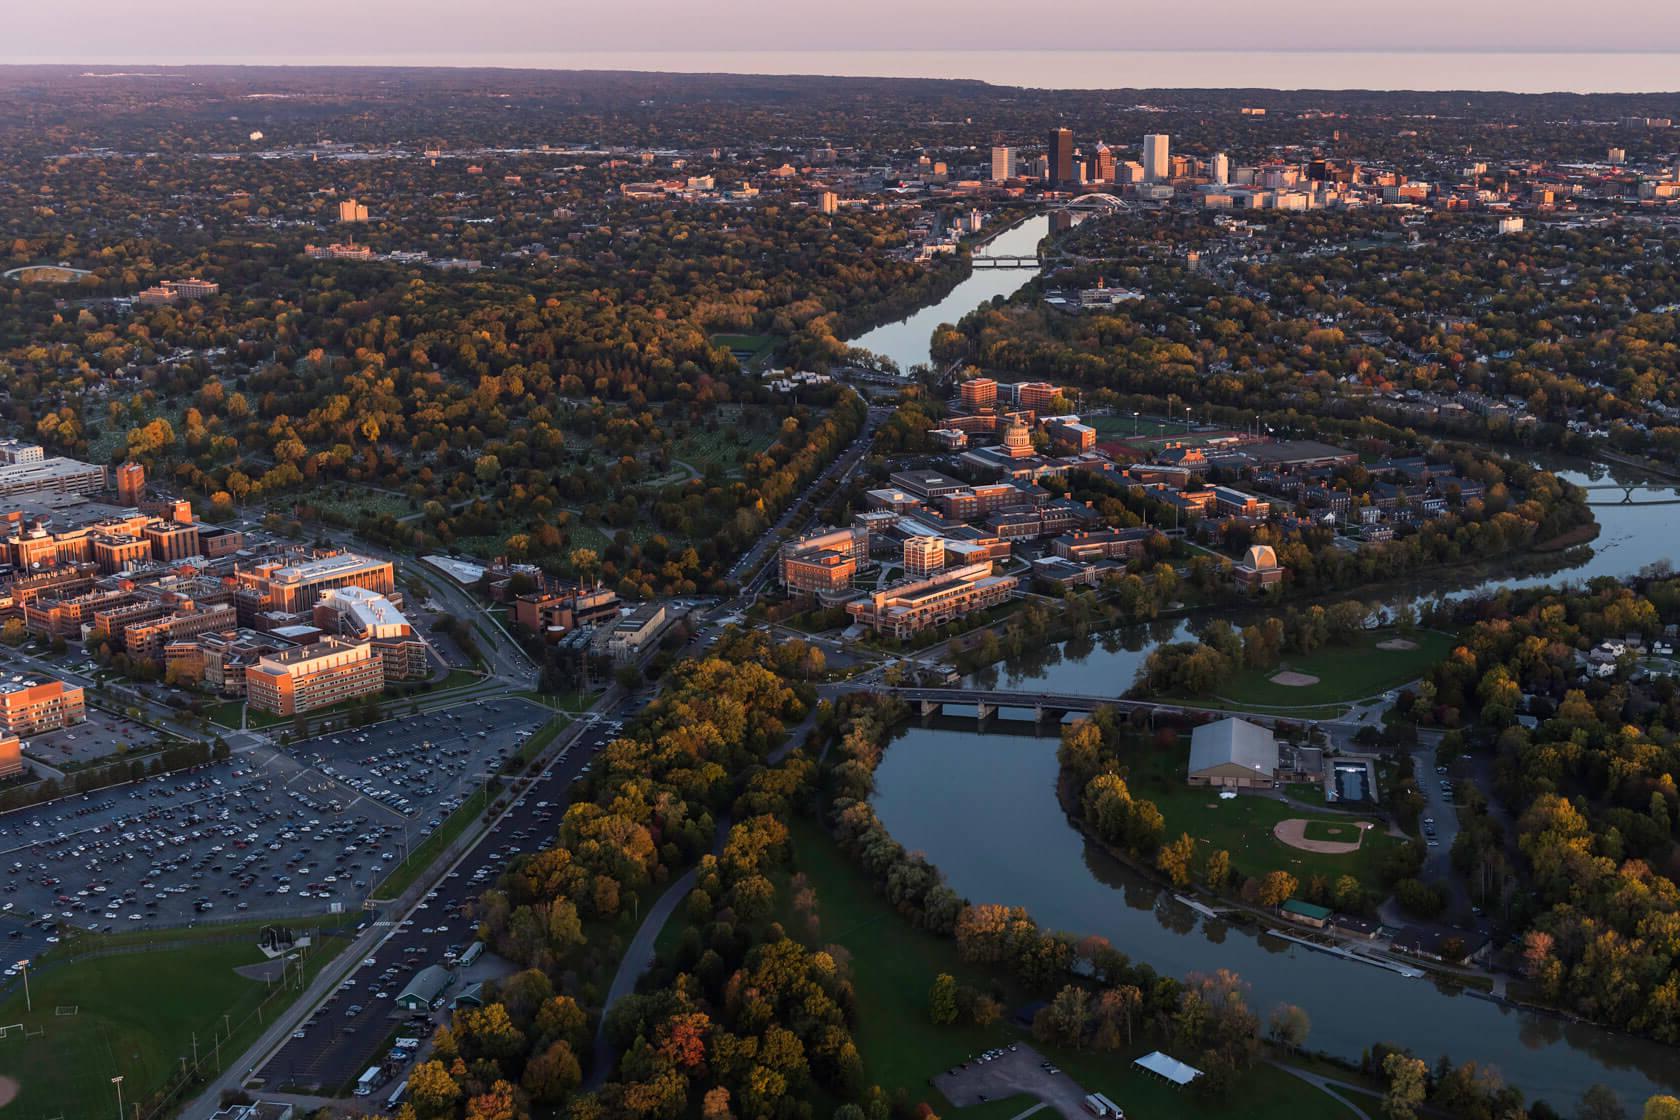 Aerial views of the University of Rochester campus